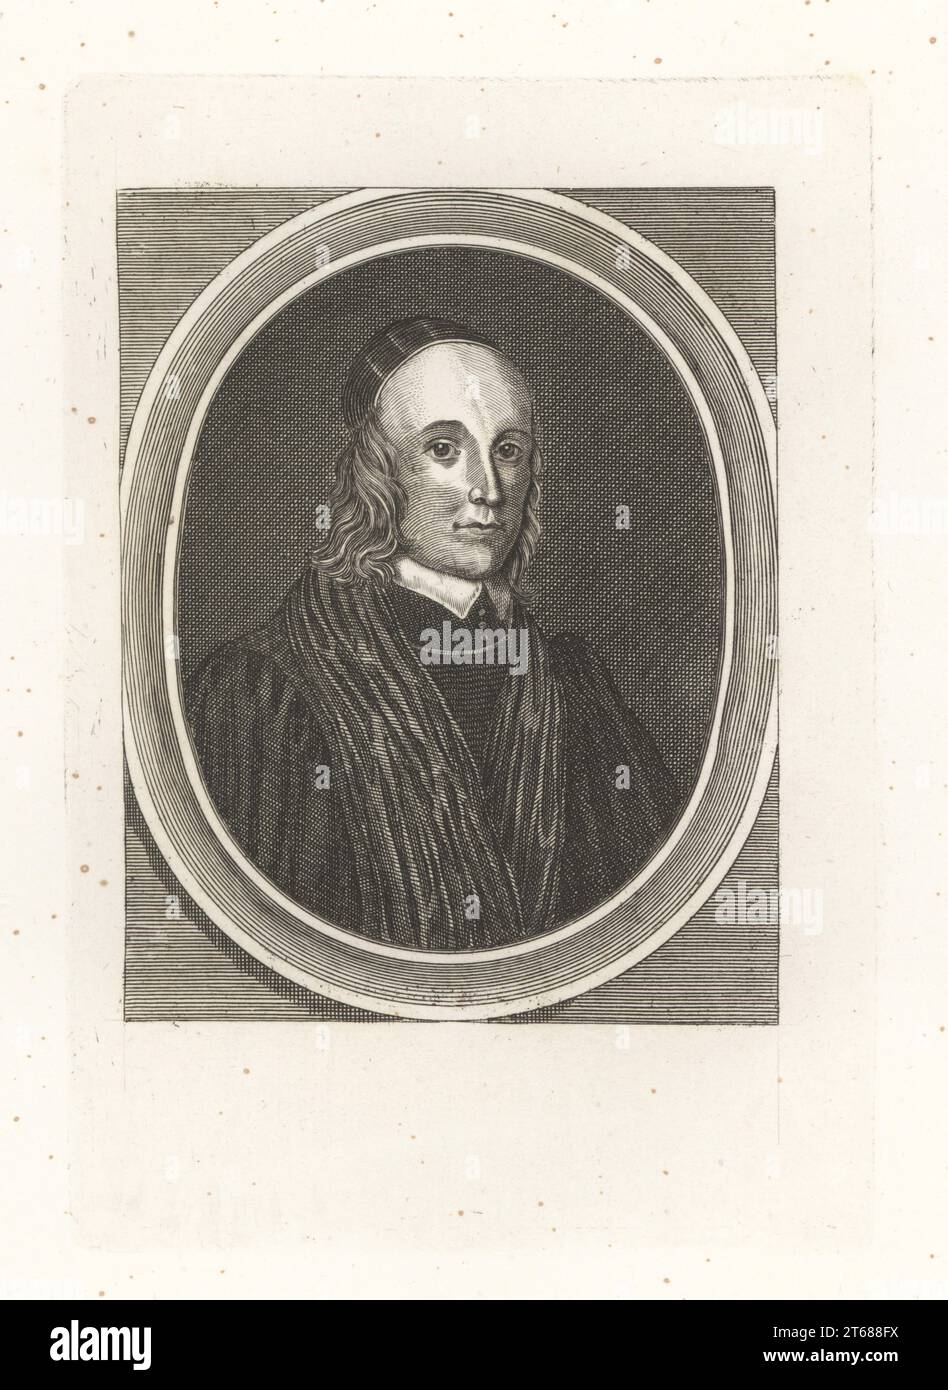 John Hewit, royalist divine, chaplain to King Charles I of England, 1614-1658. In skull cap, collar and ecclesiastical robes. Copperplate engraving from Samuel Woodburns Gallery of Rare Portraits Consisting of Original Plates, George Jones, 102 St Martins Lane, London, 1816. Stock Photo